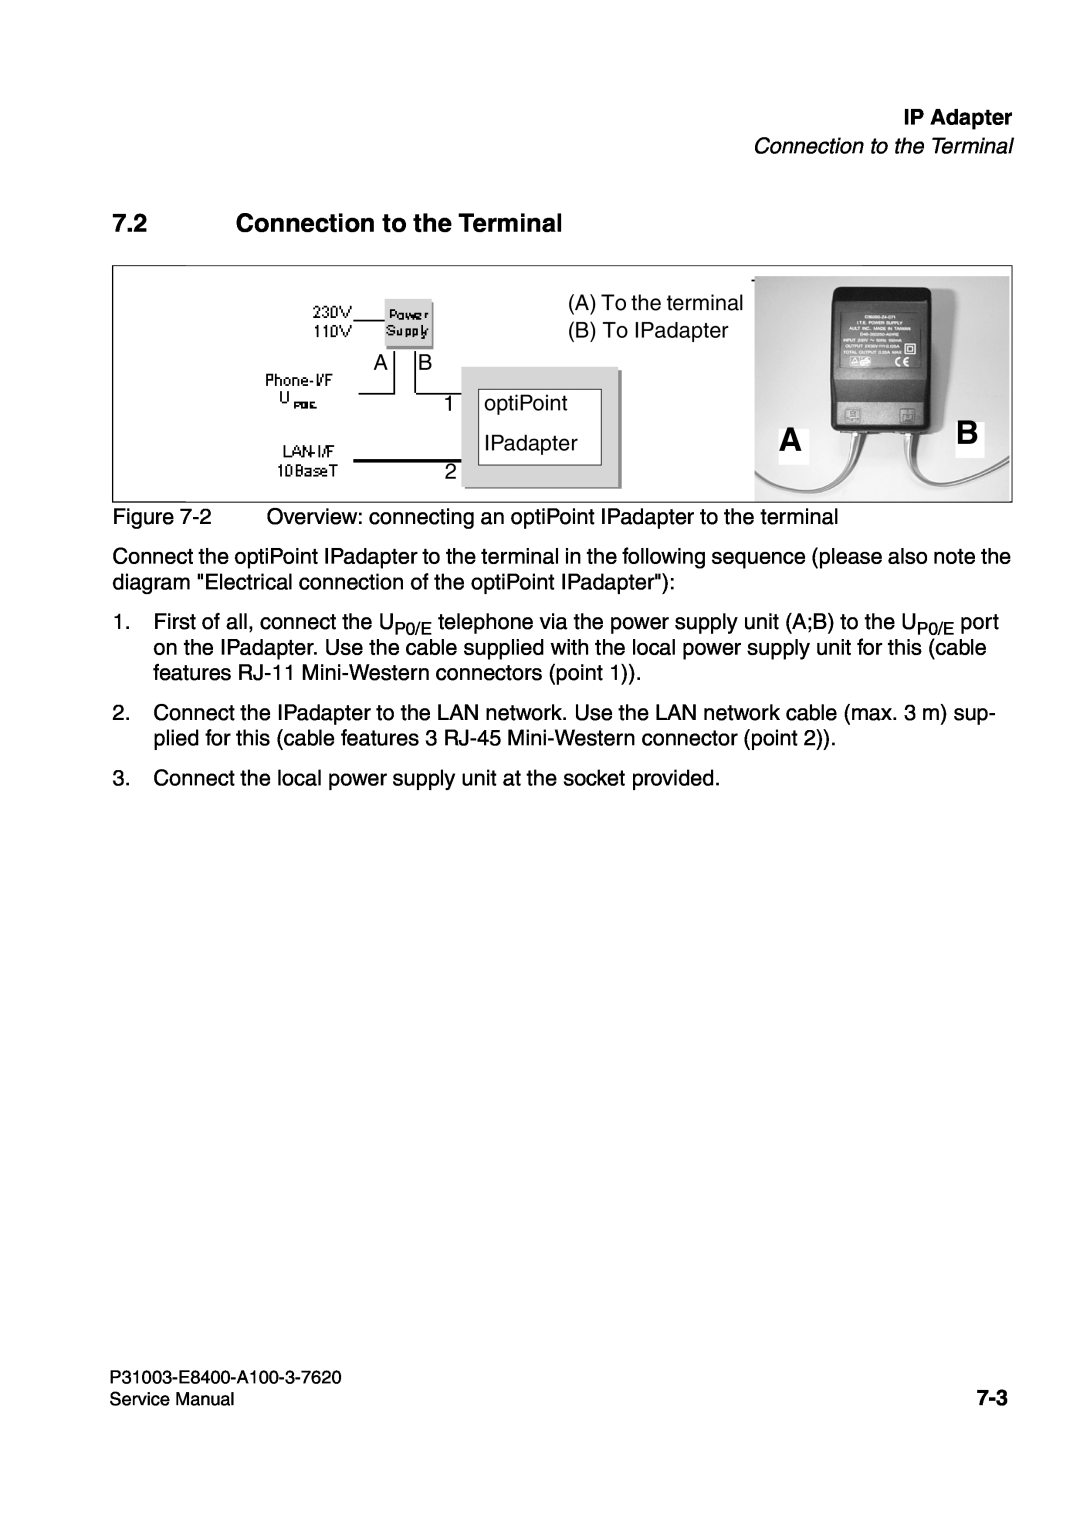 Siemens 500 service manual Connection to the Terminal, IP Adapter 